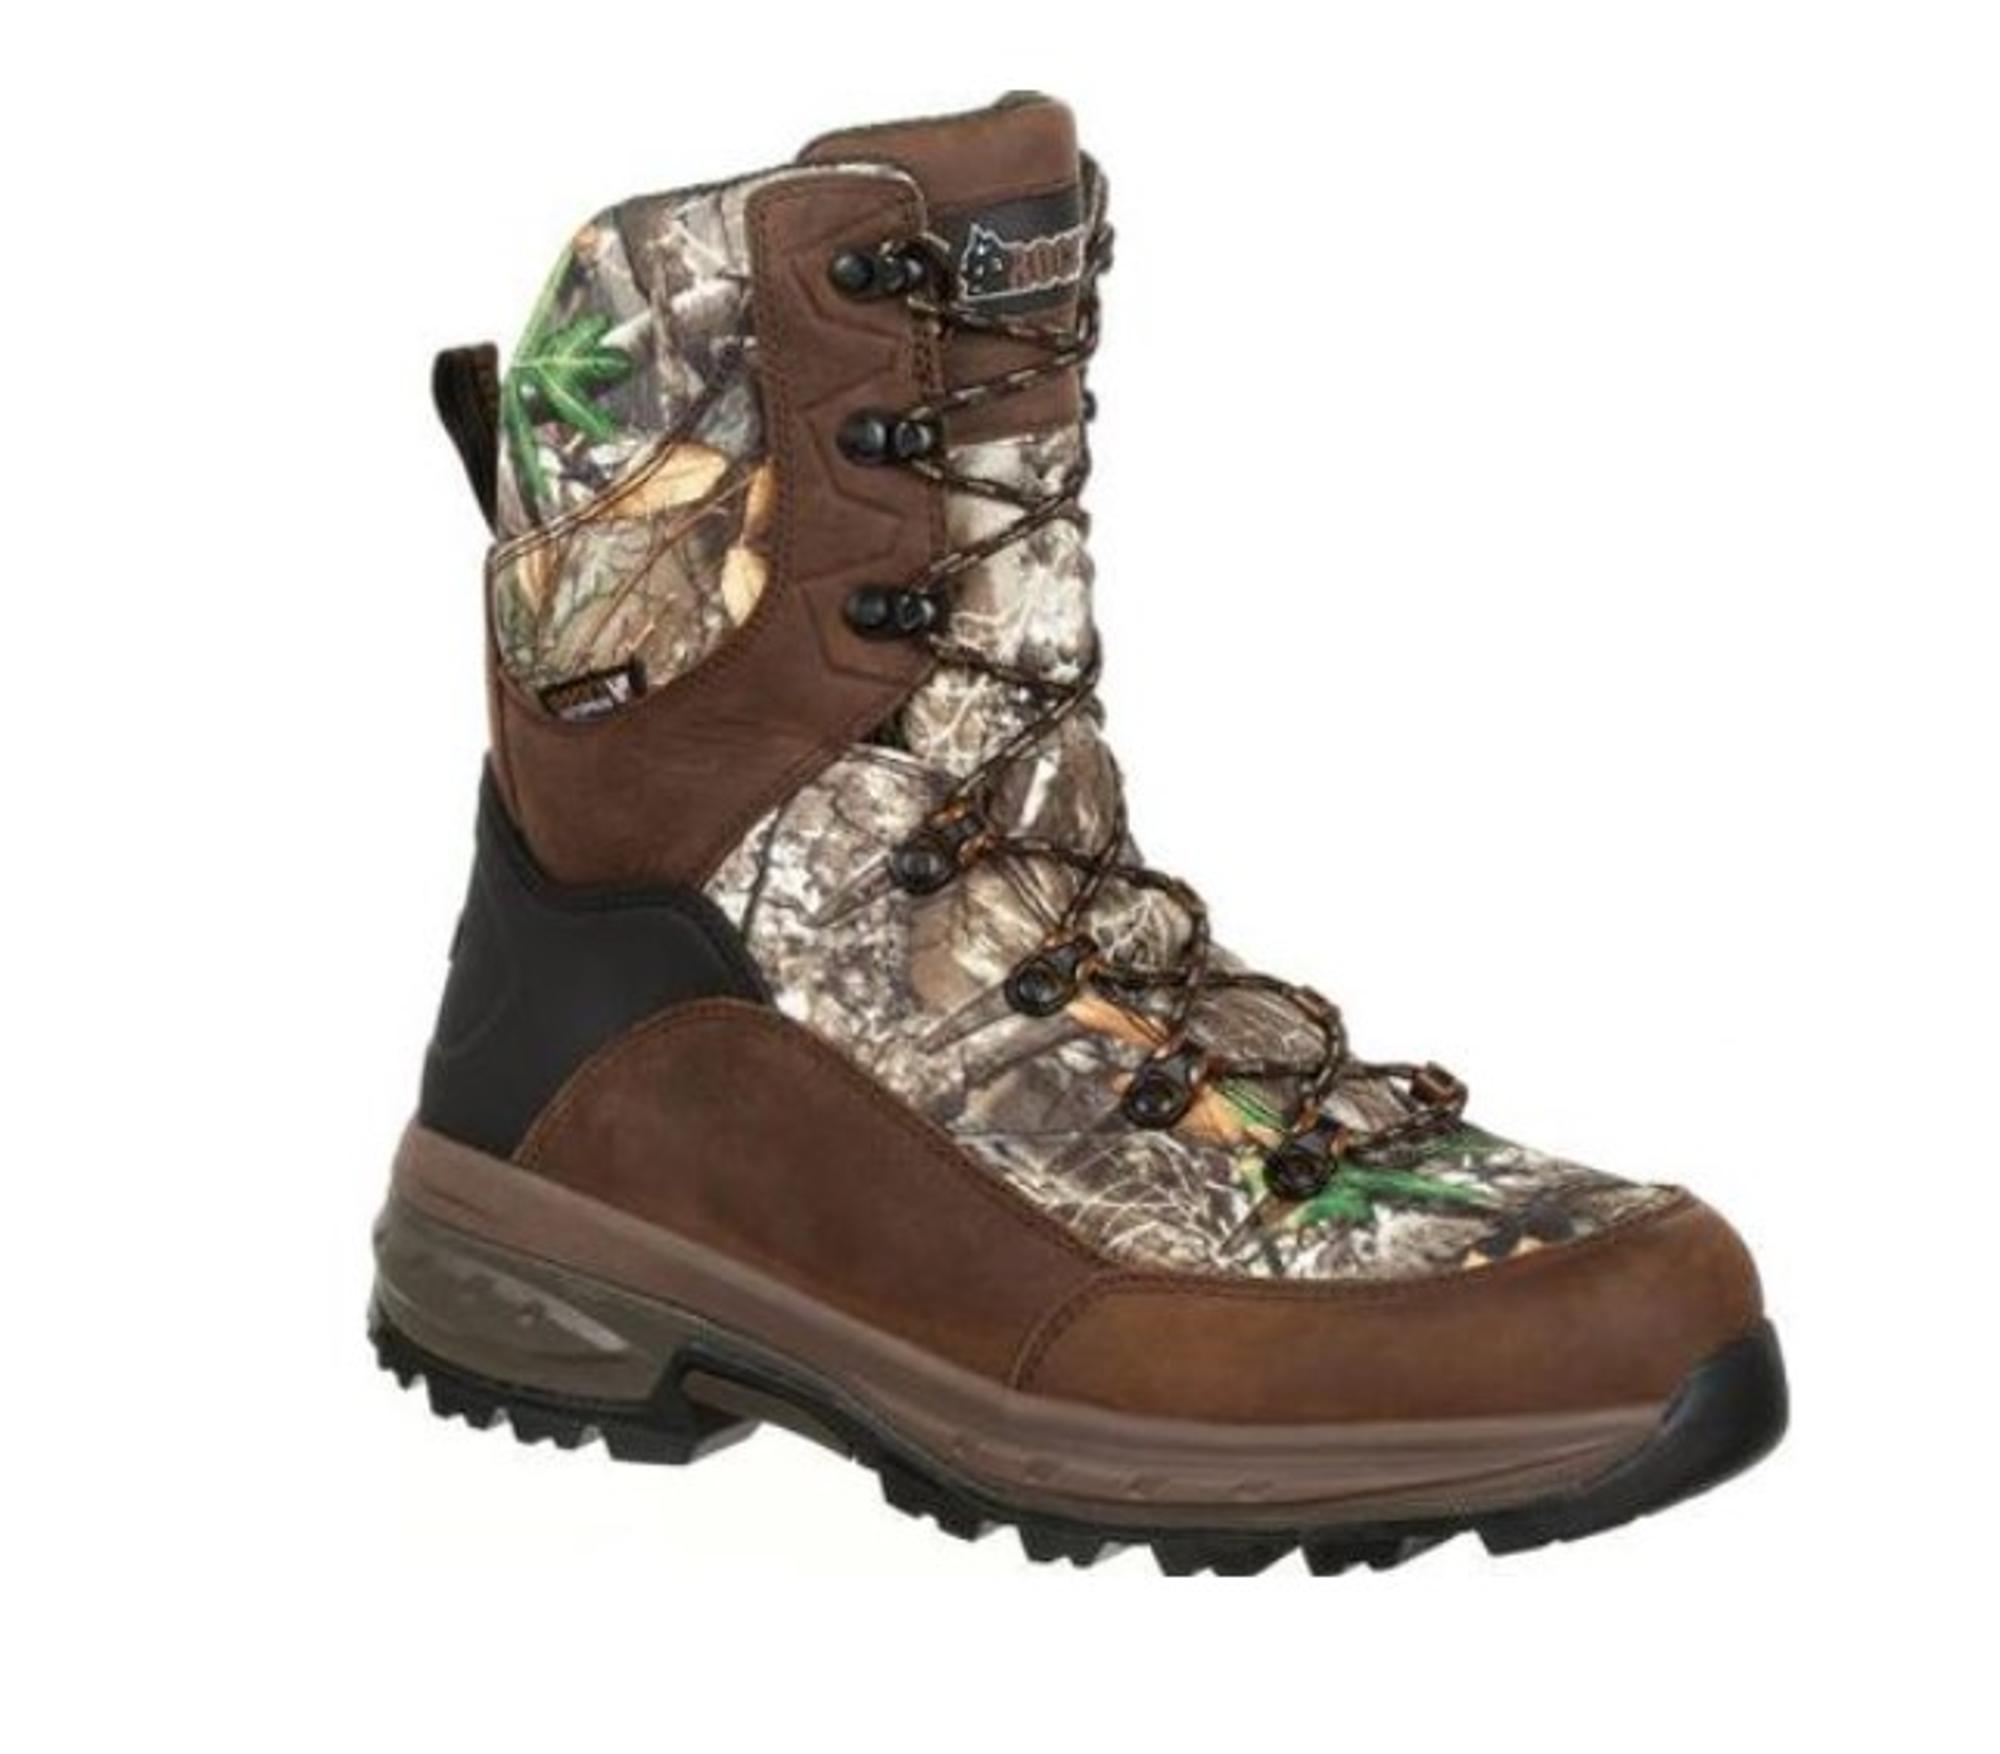 Grizzly Waterproof 100g Insulated Outdoor Boots